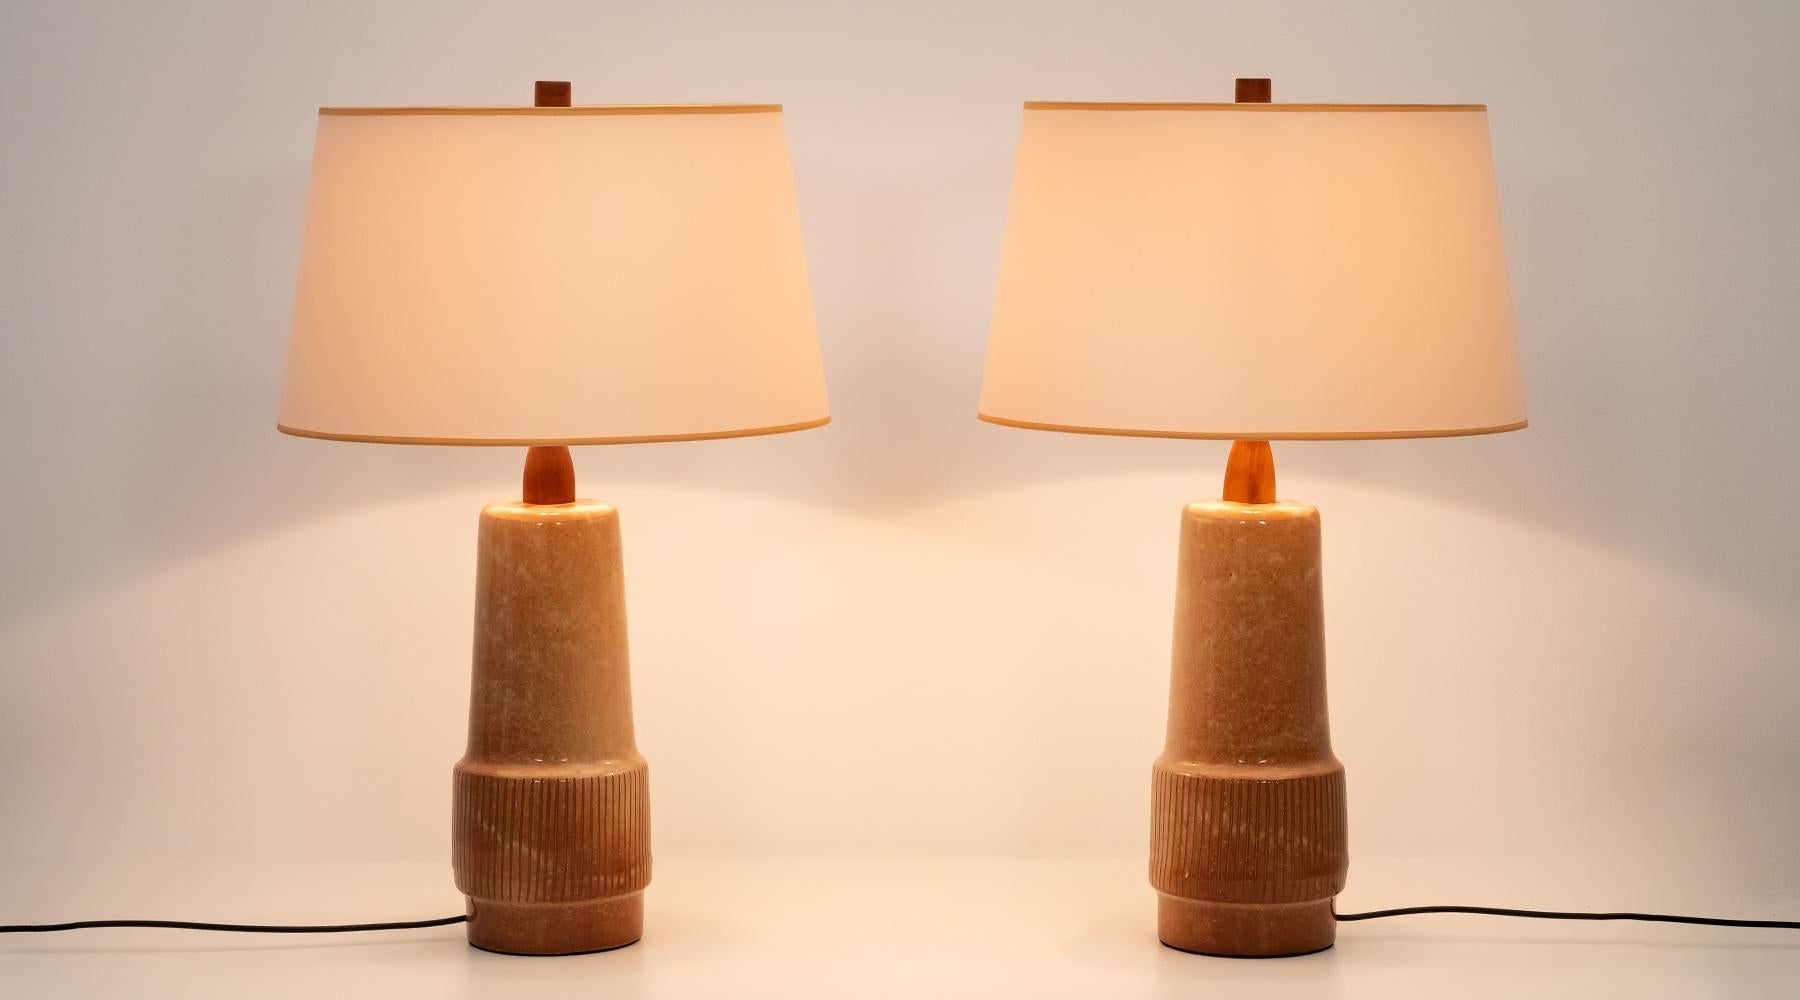 Pair of table lamp, warm, light, brown ceramic, light shadow, Jane and Gordon Martz, USA, 1954

A perfectly matching pair of table lamps in the typical earthy and sandy colours by Gordon & Jane Martz. 
The light shade with matching border follows